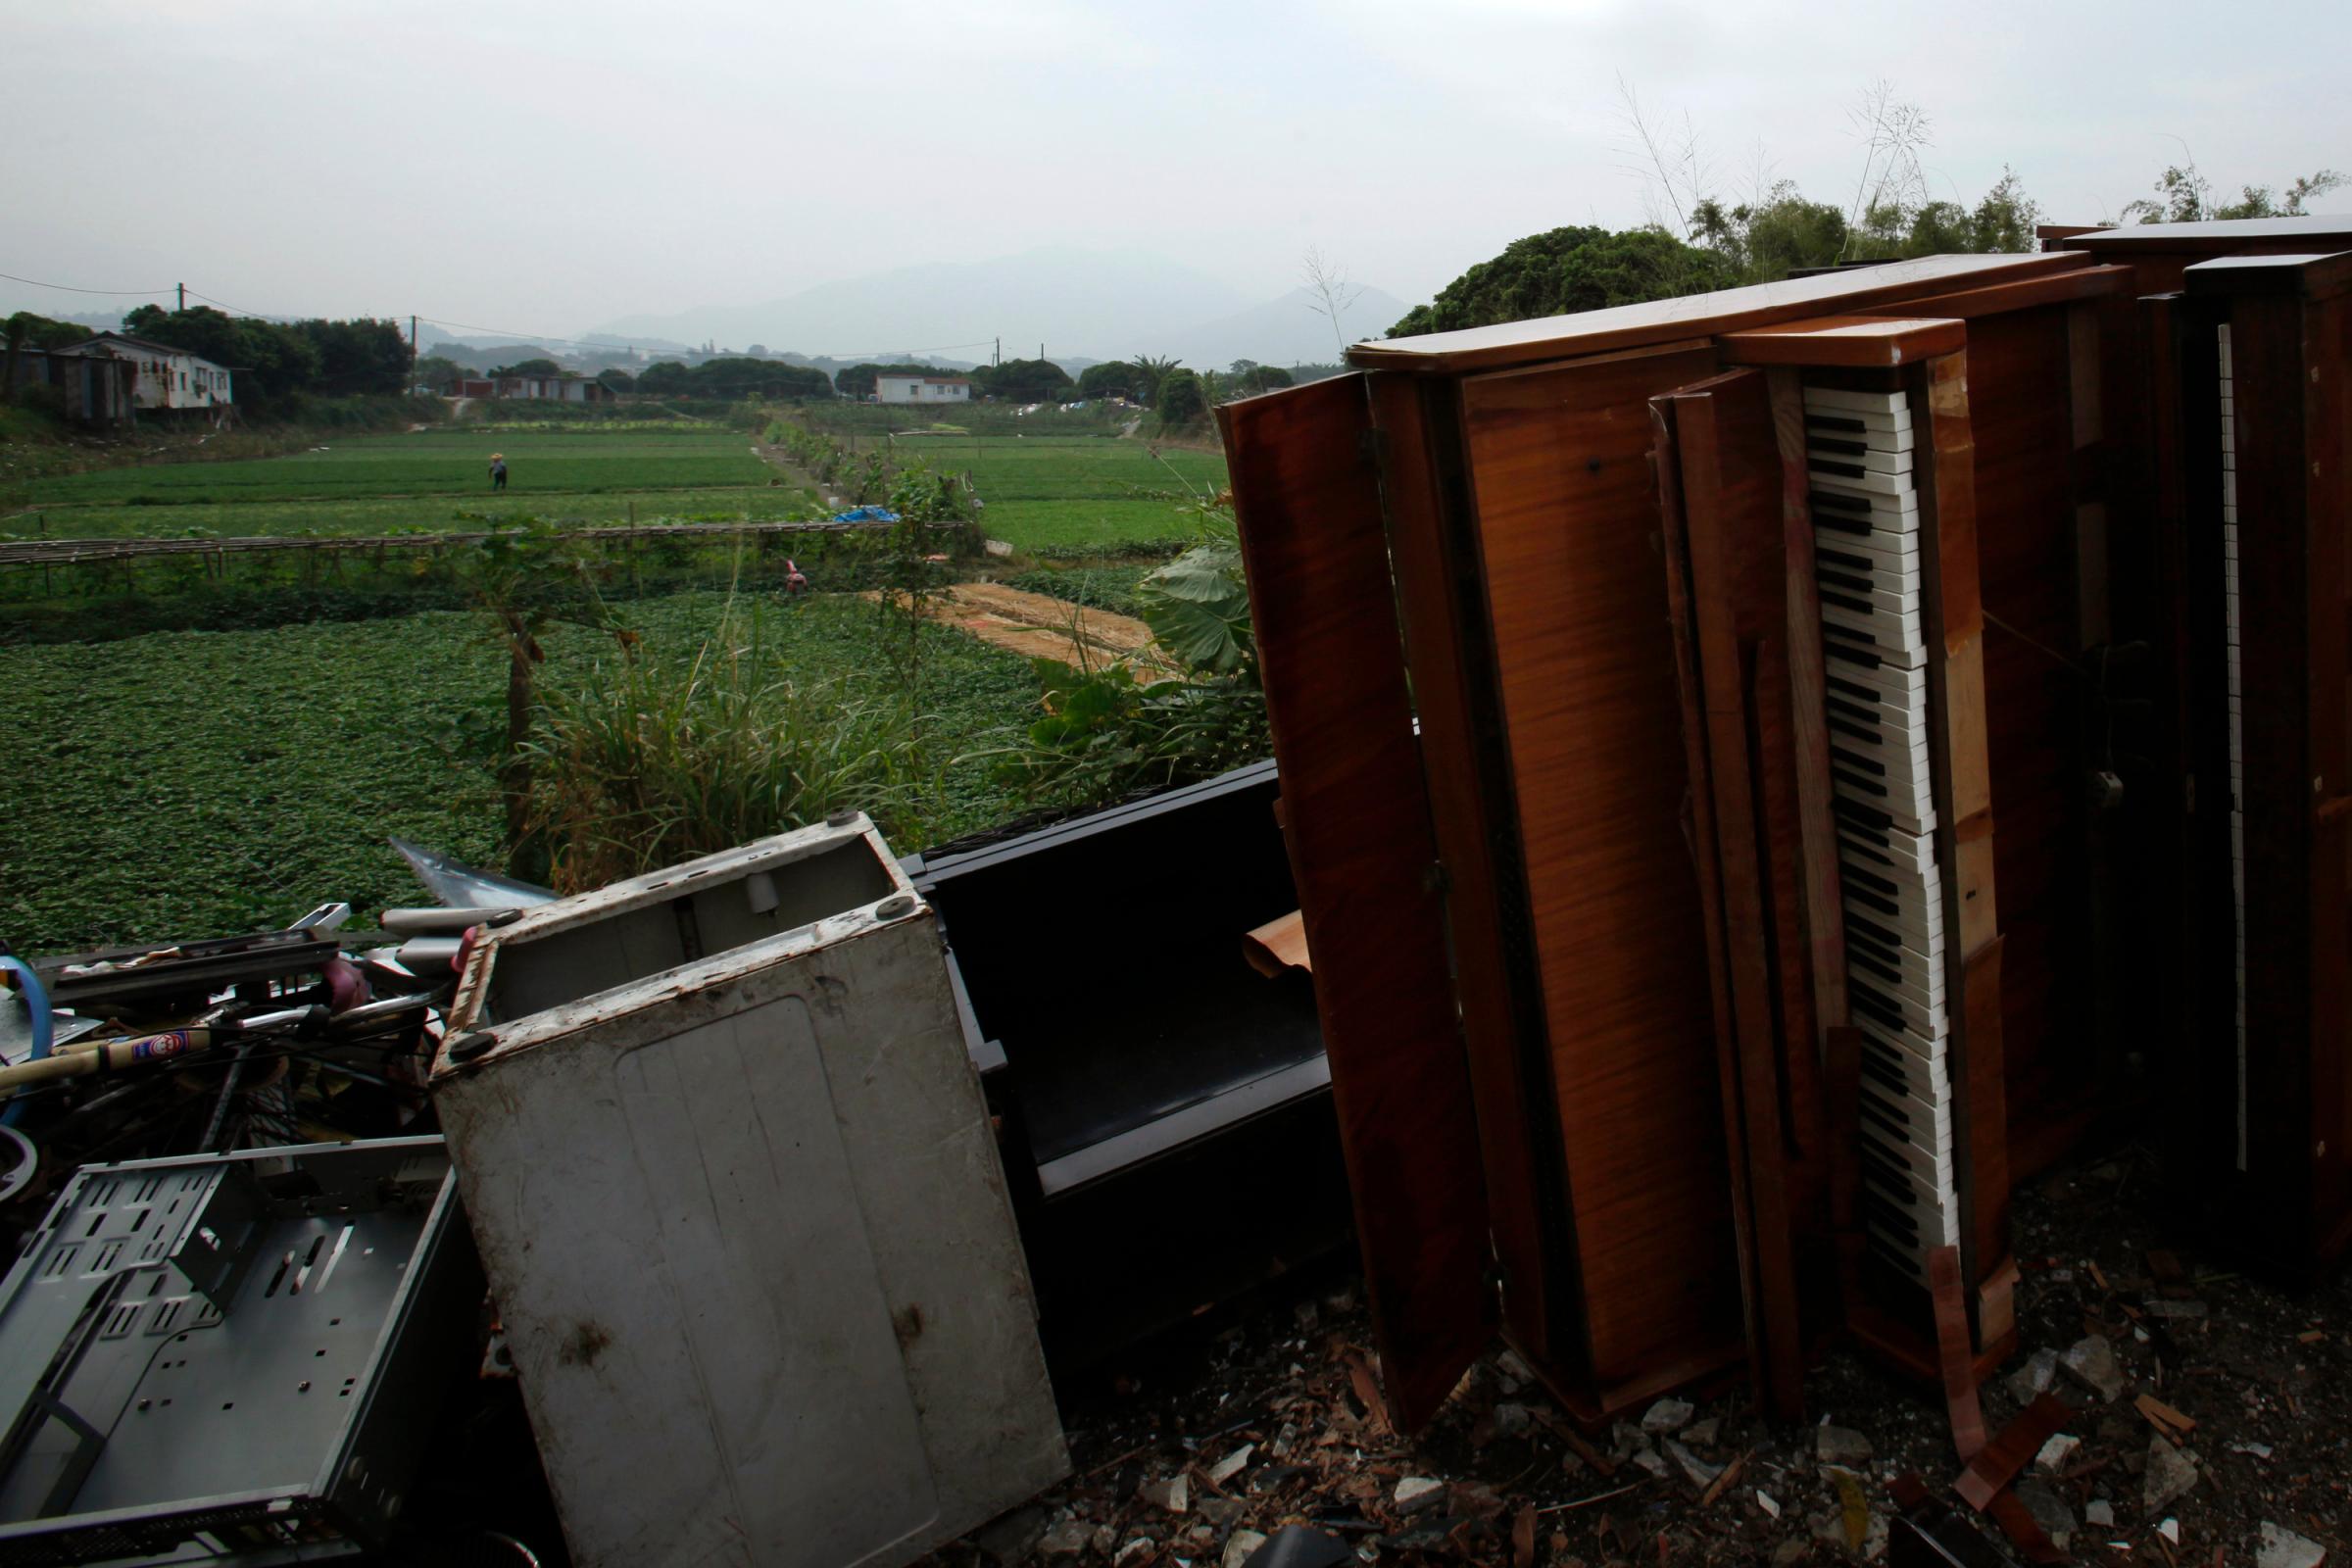 Unwanted pieces of furniture are dumped near farms in Hong Kong